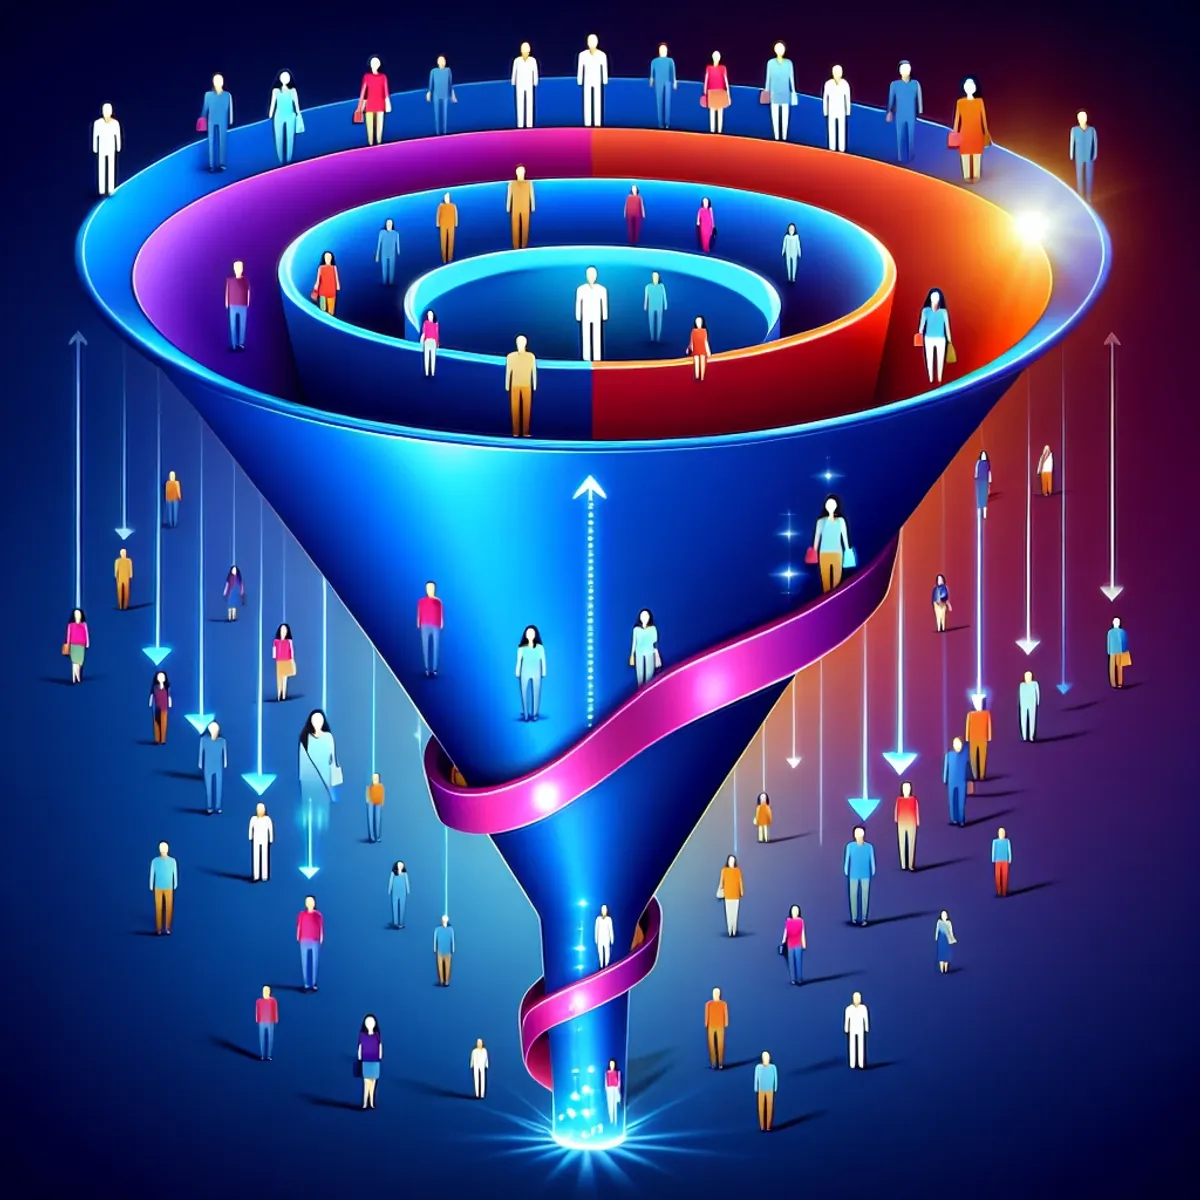 A digital artwork of a conversion funnel with diverse individuals entering the top and becoming customers at the bottom.